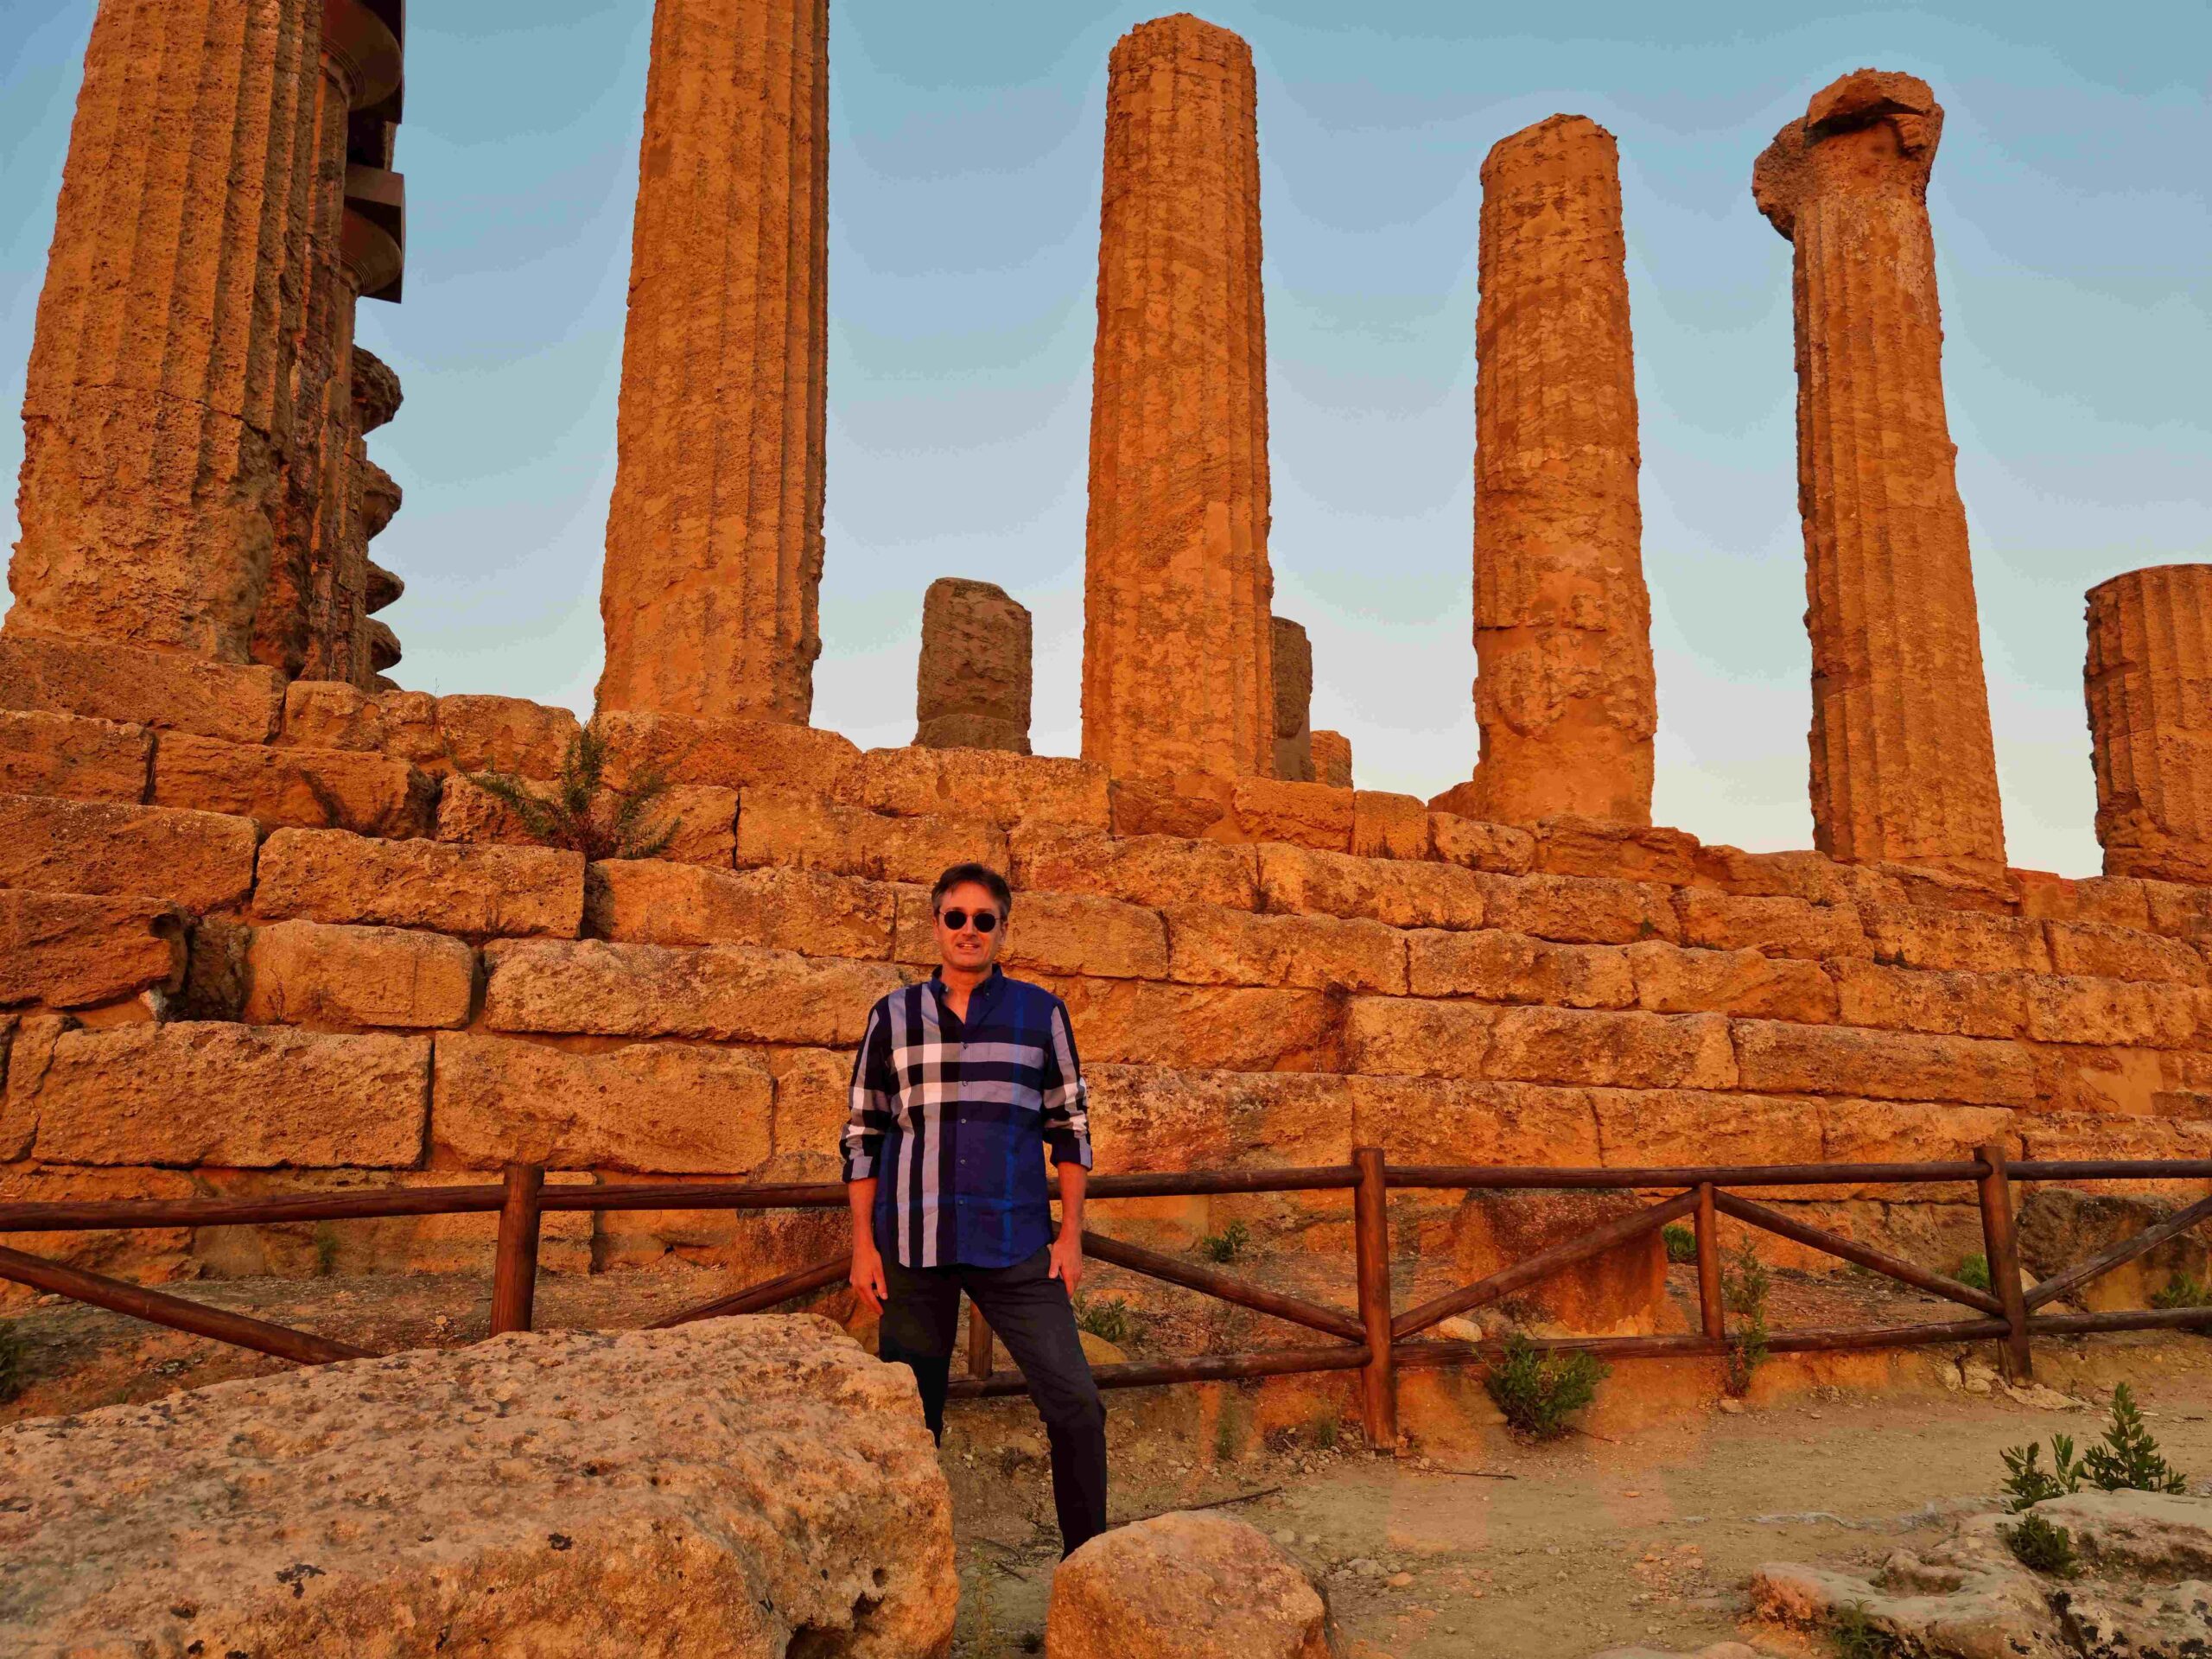 Alain Chivilo at Temple of Juno, Agrigento, Italy